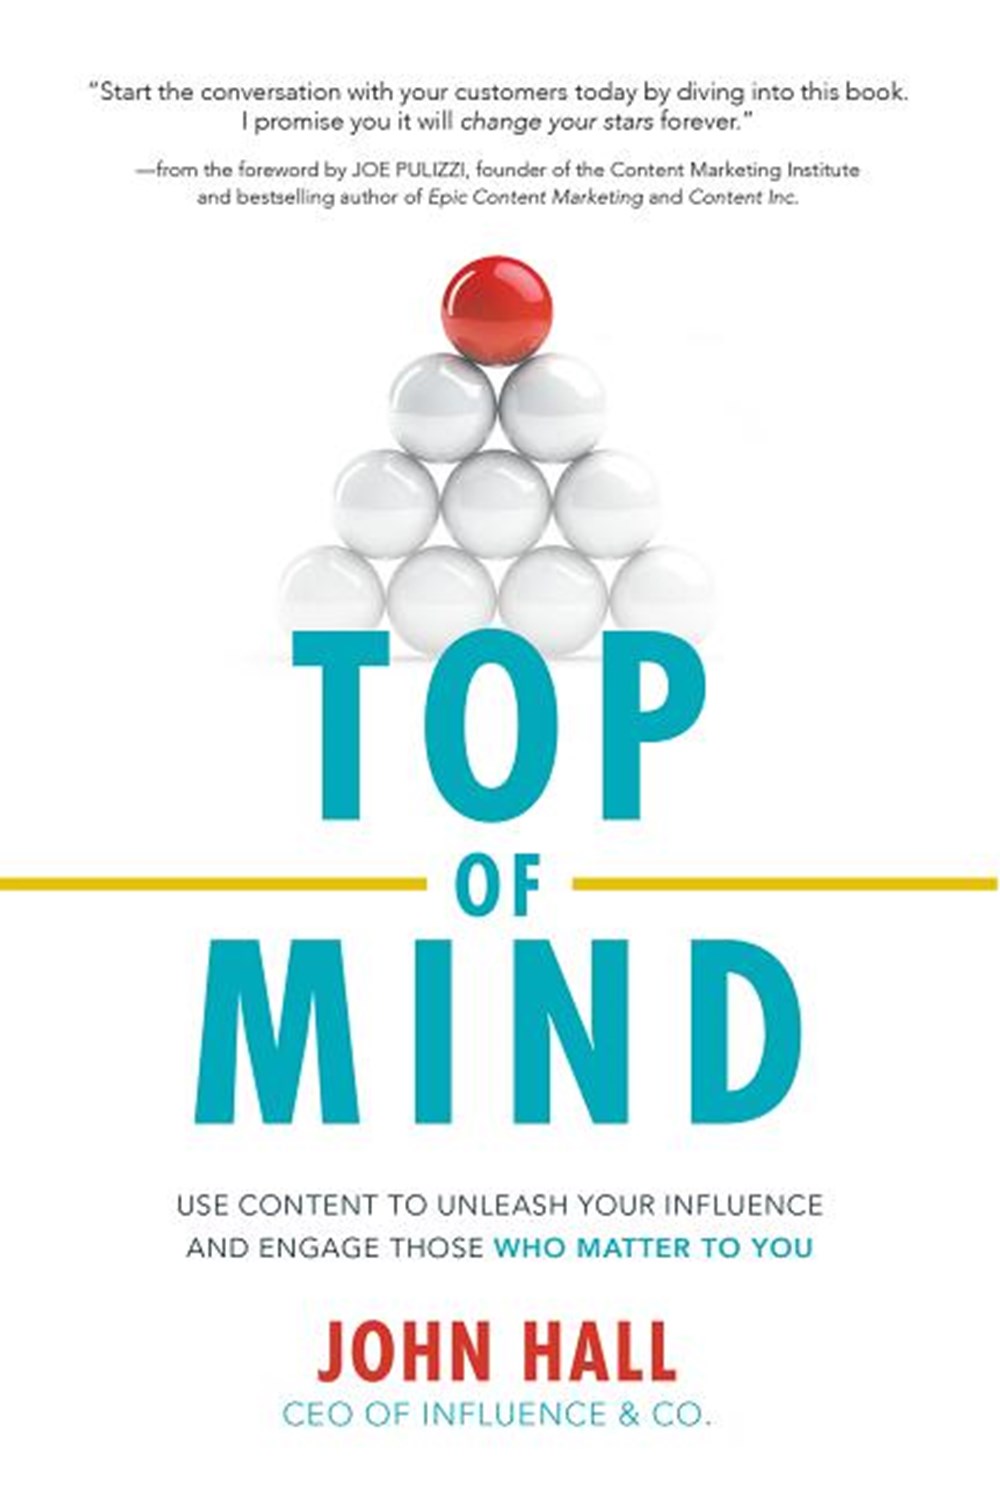 Top of Mind Use Content to Unleash Your Influence and Engage Those Who Matter to You